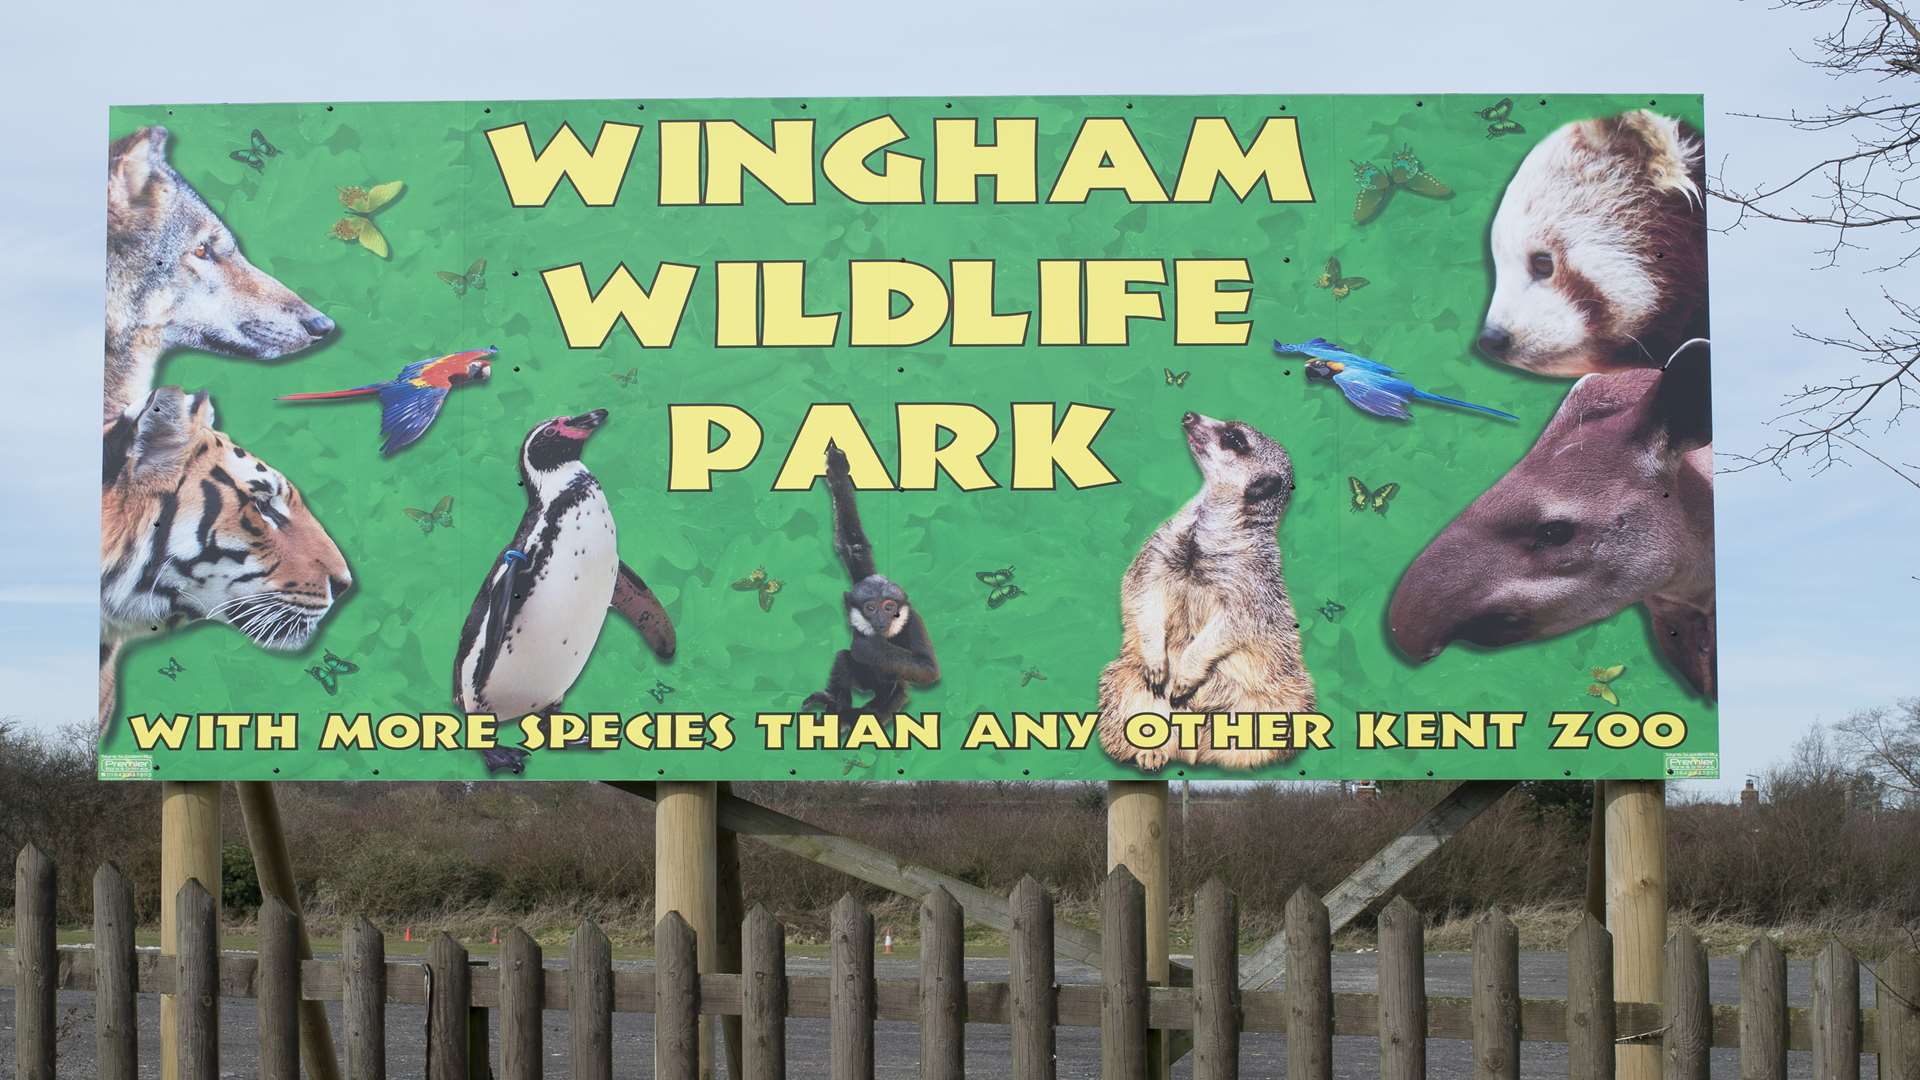 The entrance to Wingham Wildlife Park